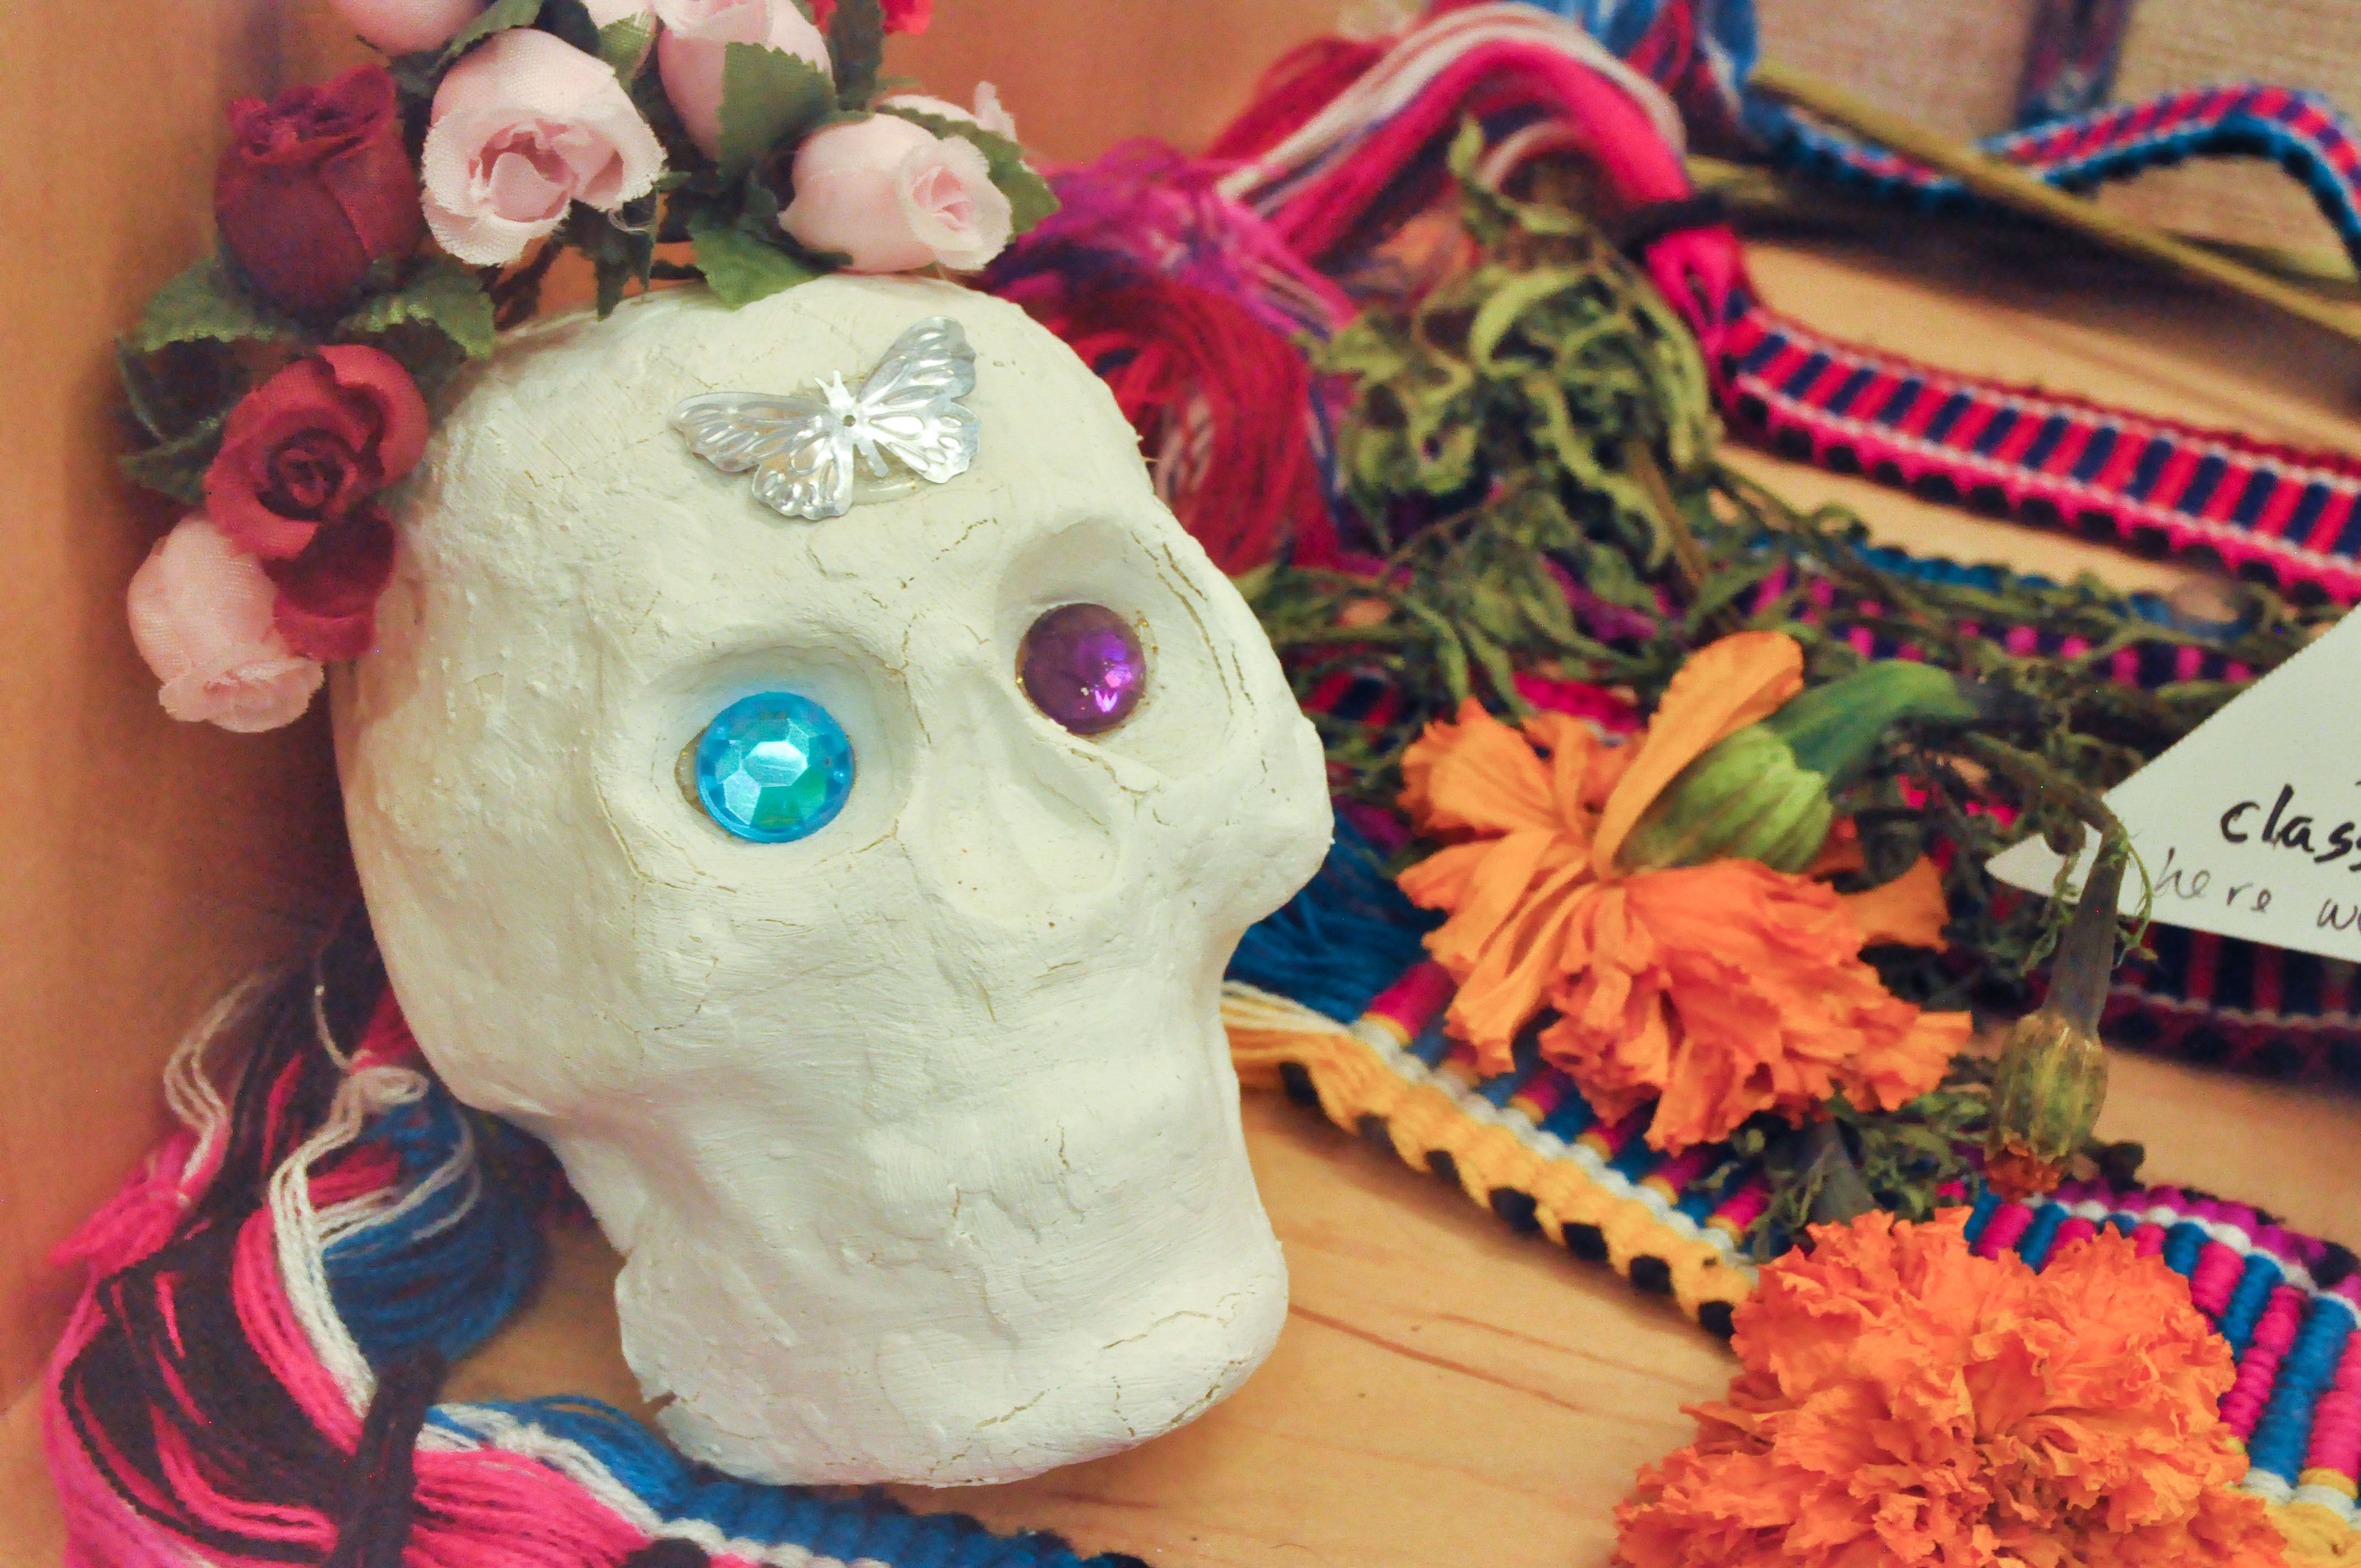 Colorful altars and decorations are displayed on the first floor of City College Mission Campus that give a brief description of the culture and traditions celebrated during “The Day of the Dead” on Thursday, Oct. 29, 2015. (Photo by Bridgid Skiba/The Guardsman)